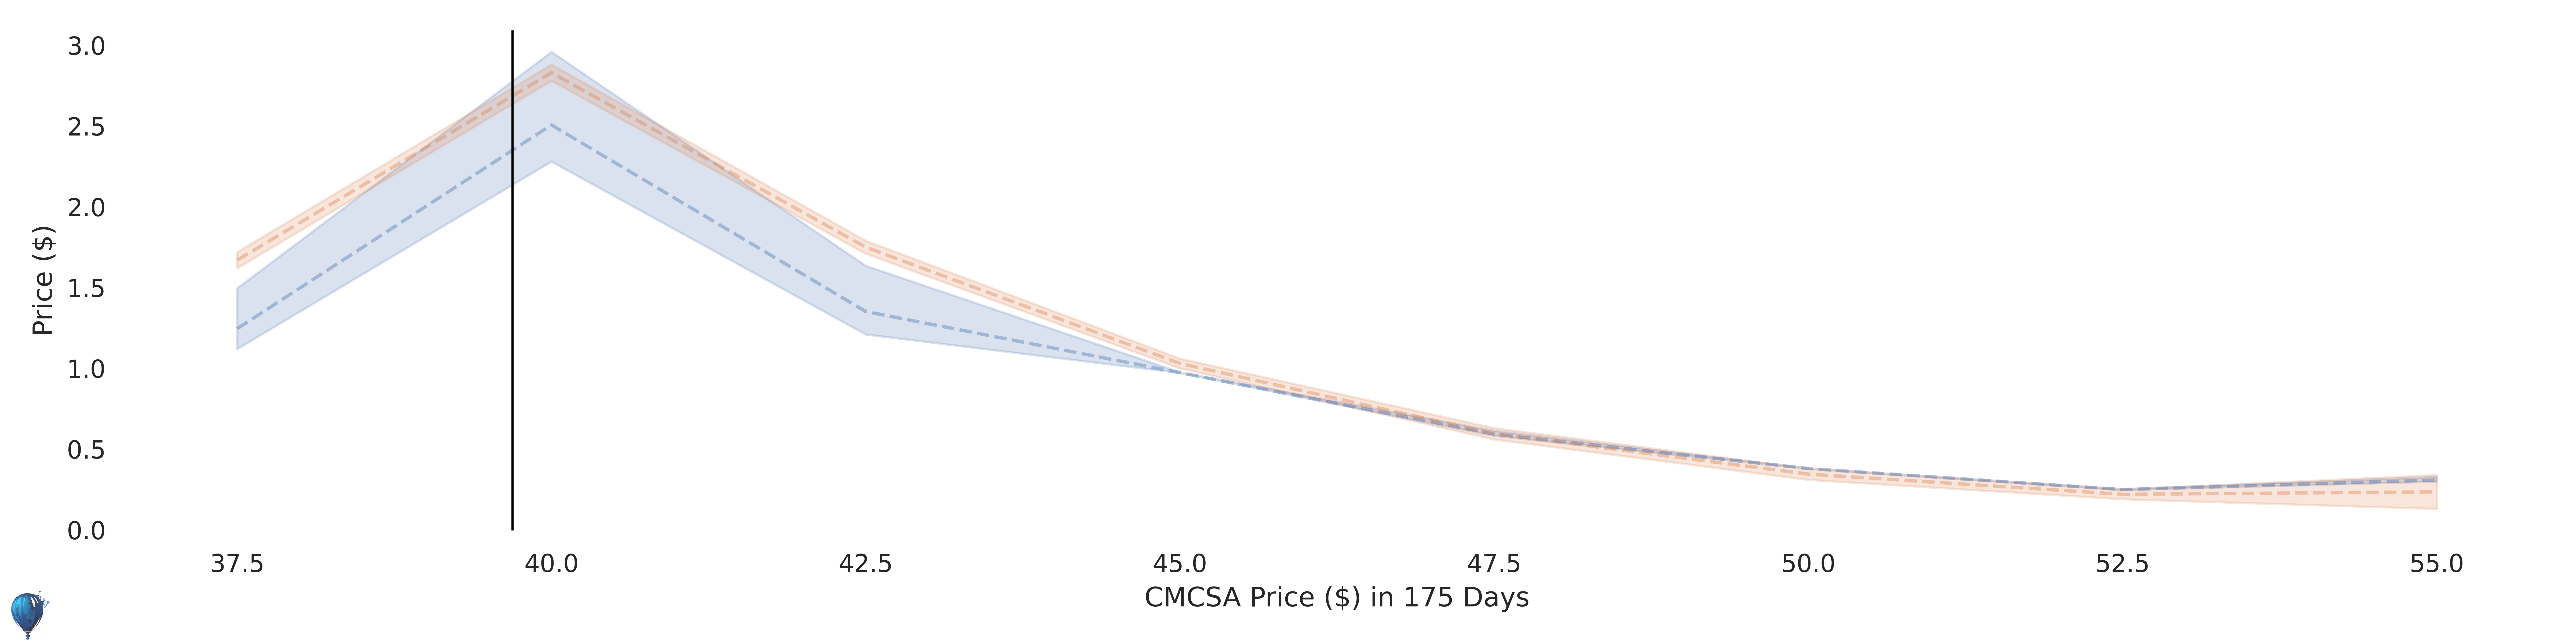 CMCSA current options pricing